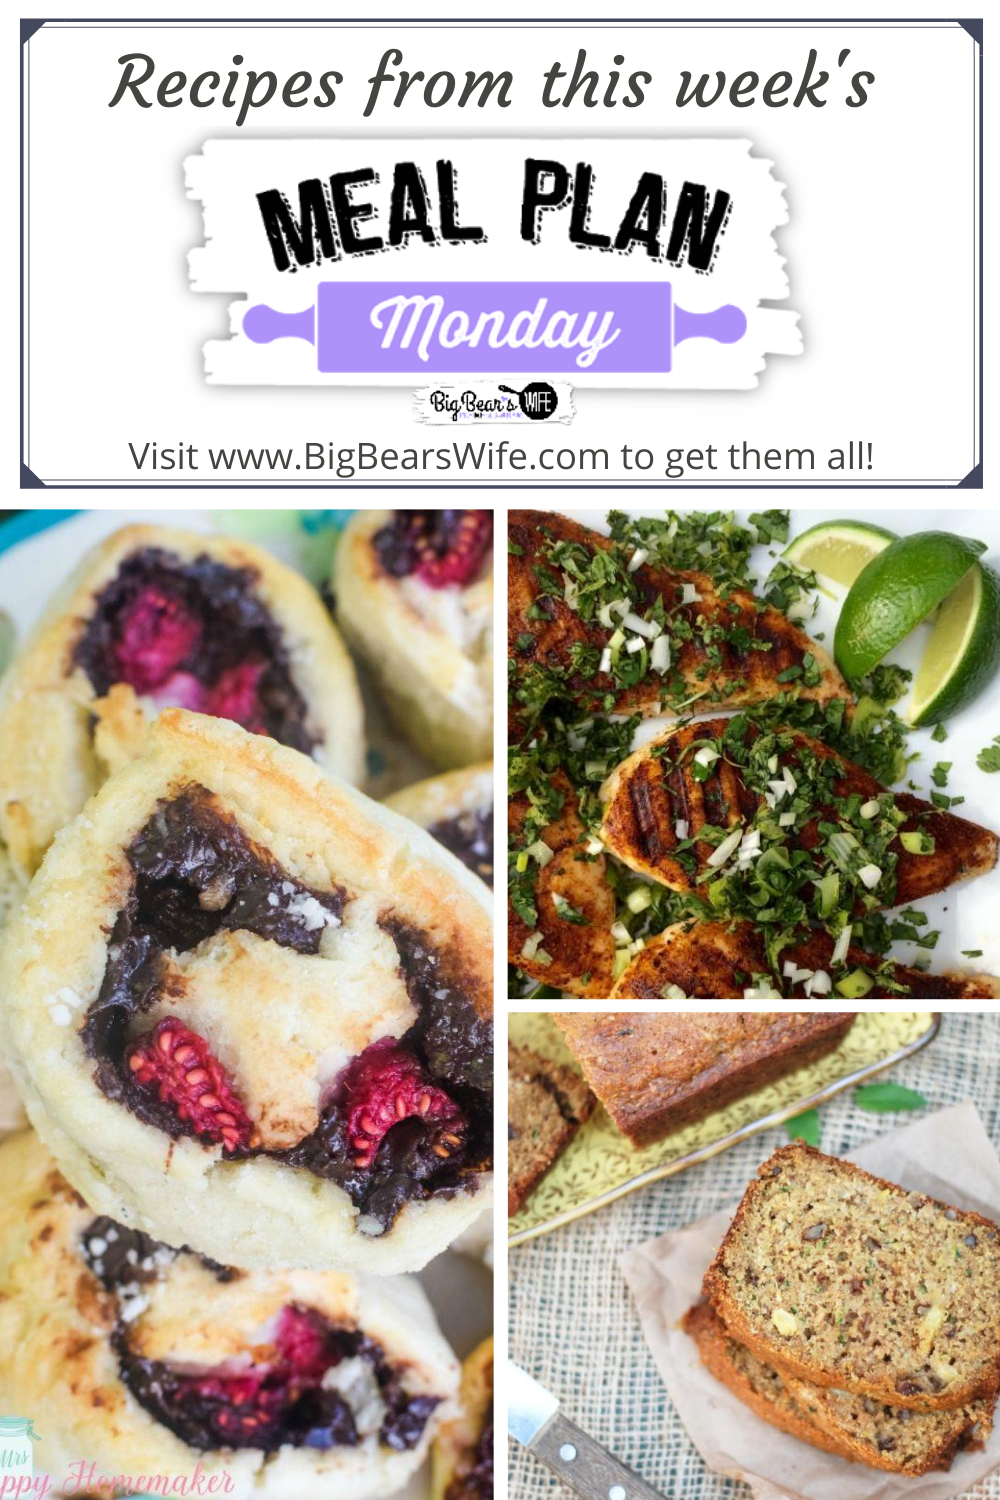 This week's Meal Plan Monday featured recipes include Vegetable Lasagna, Pineapple Zucchini Bread, Grilled Chili Spiced Chicken with Cilantro Lime Gremolata, & Nutella Stuffed Buttermilk Biscuits. via @bigbearswife